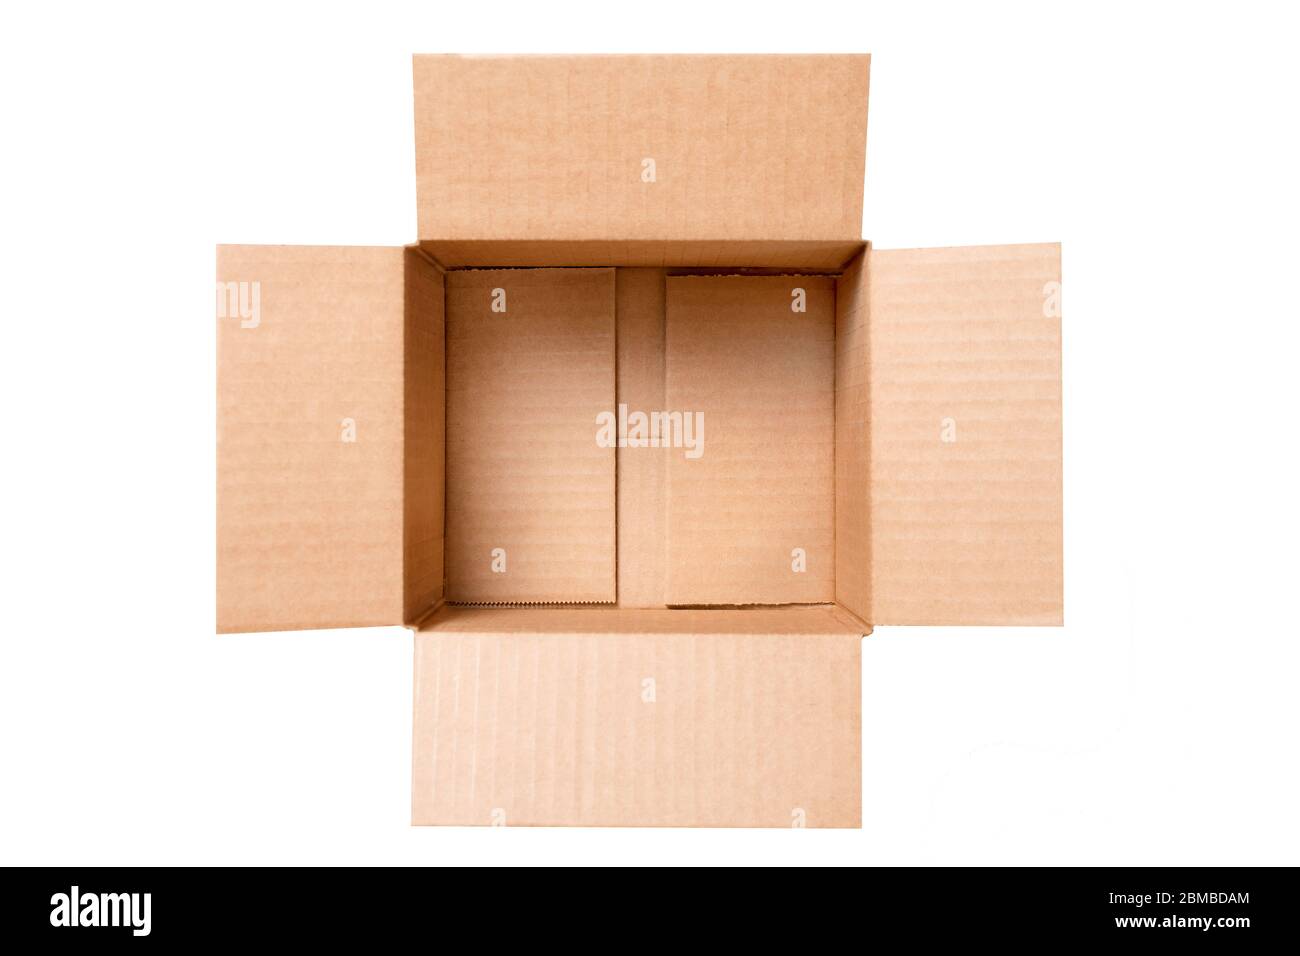 Open Empty Rectangular Cardboard Box Isolated On White Background Mockup For Design And Advertising Brown Craft Paper Or Carton Box Mock Up Top Stock Photo Alamy